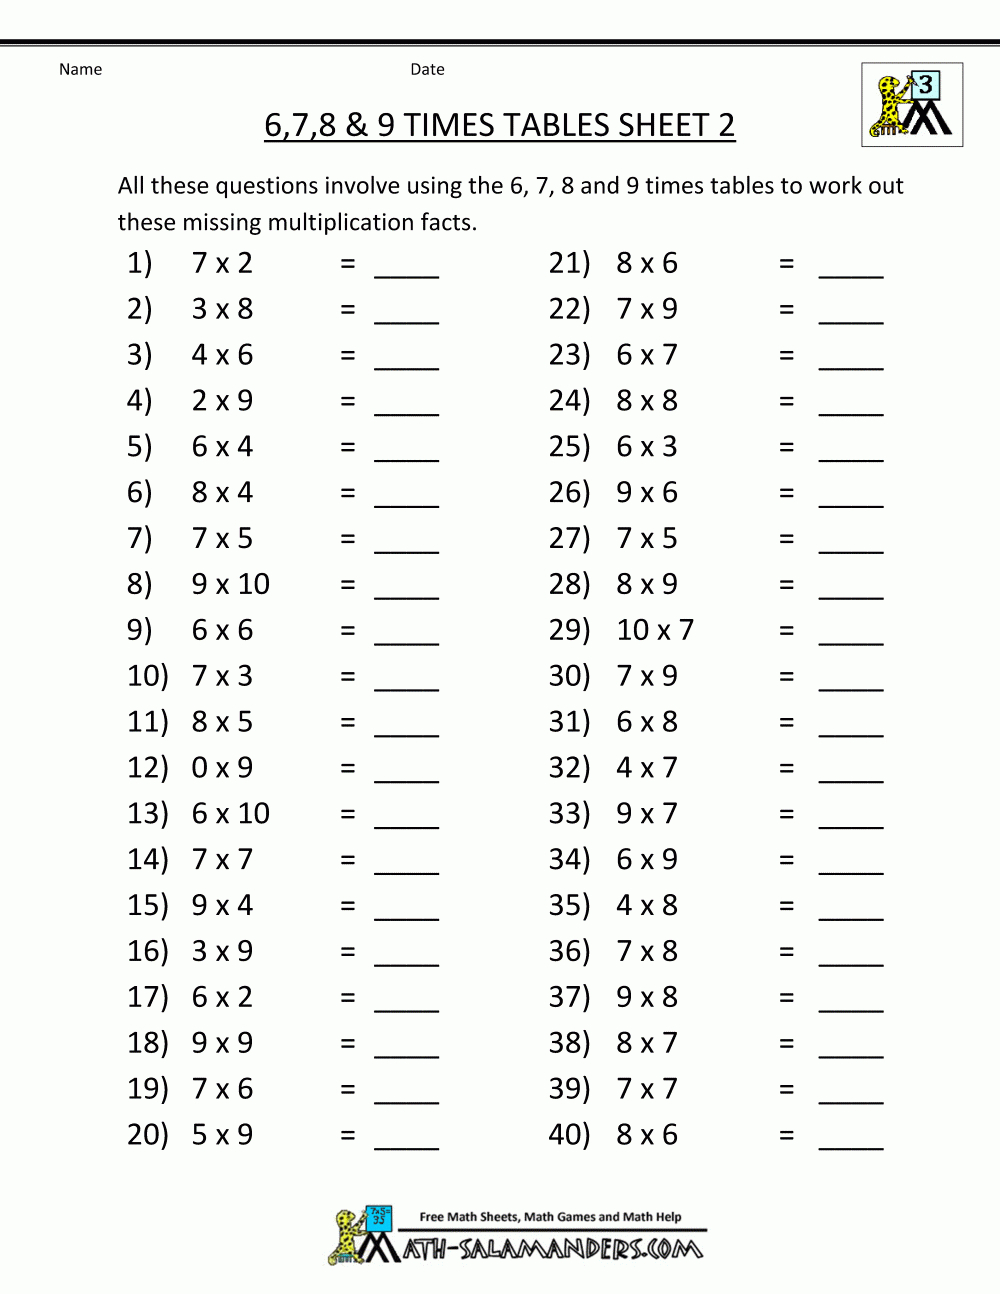 Free Math Sheets Multiplication 6 7 8 9 Times Tables 2 throughout Multiplication Worksheets And Games